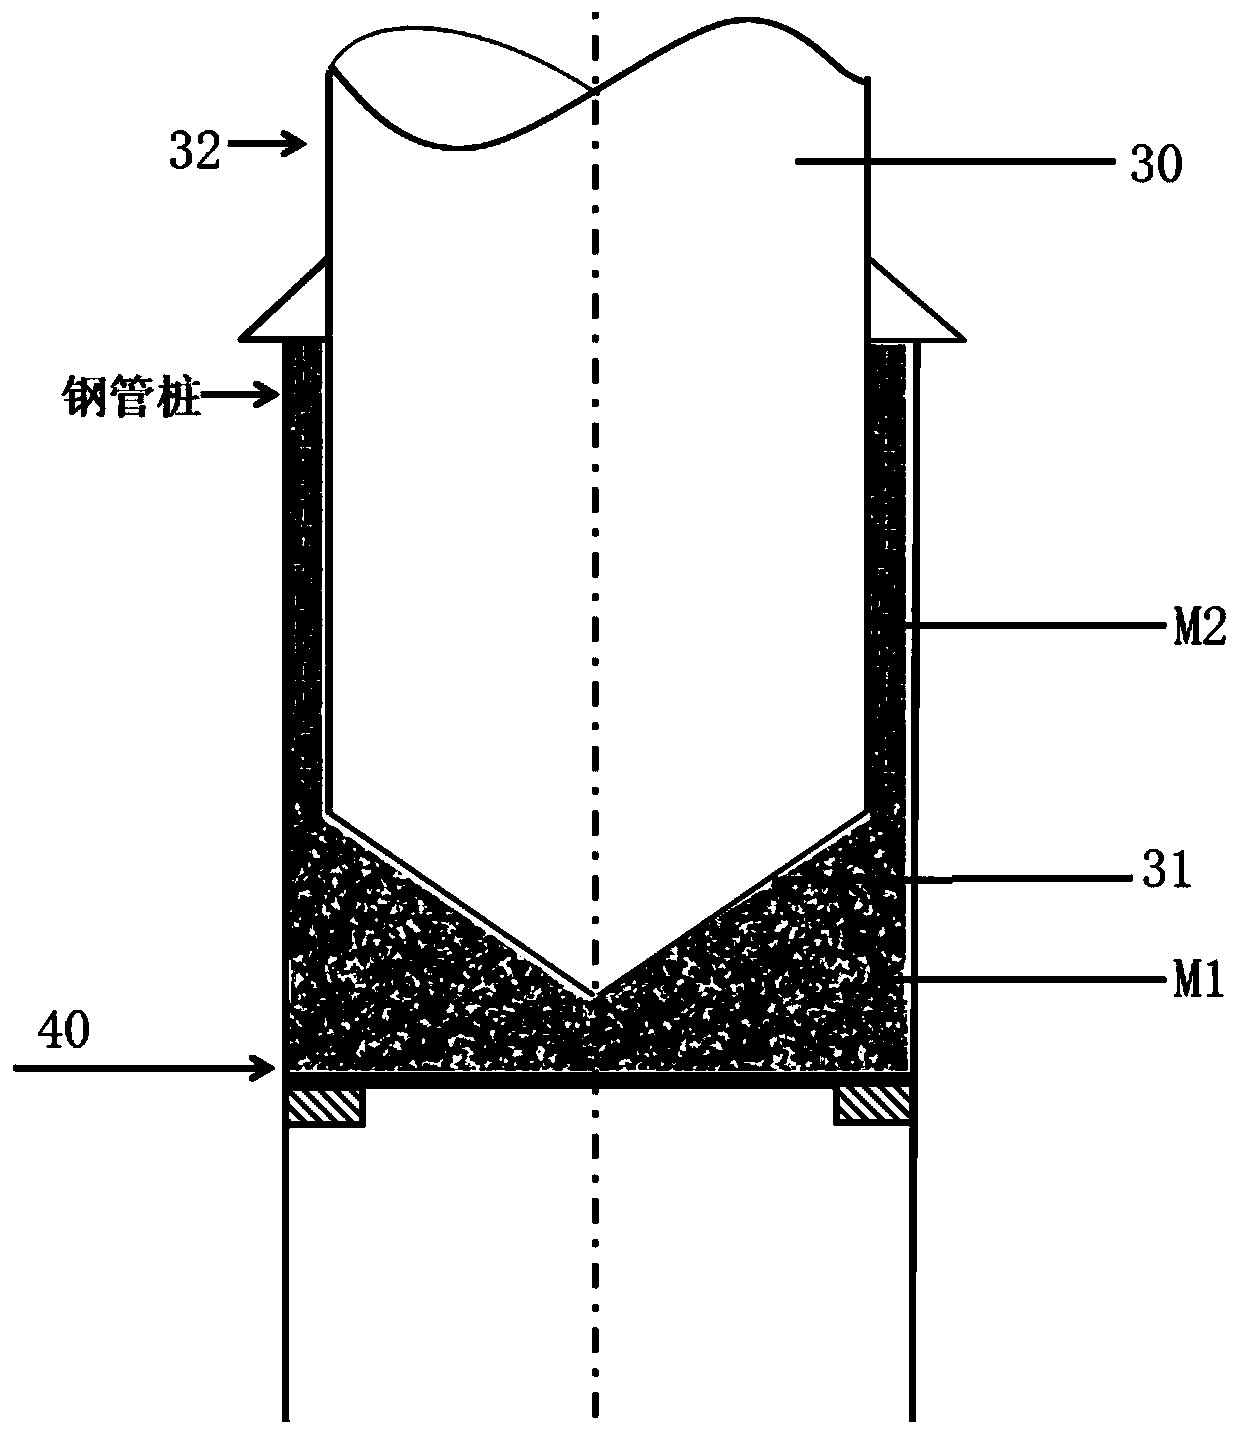 "Pile first method" interpolated jacket foundation construction system for implantable rock-socketed pile